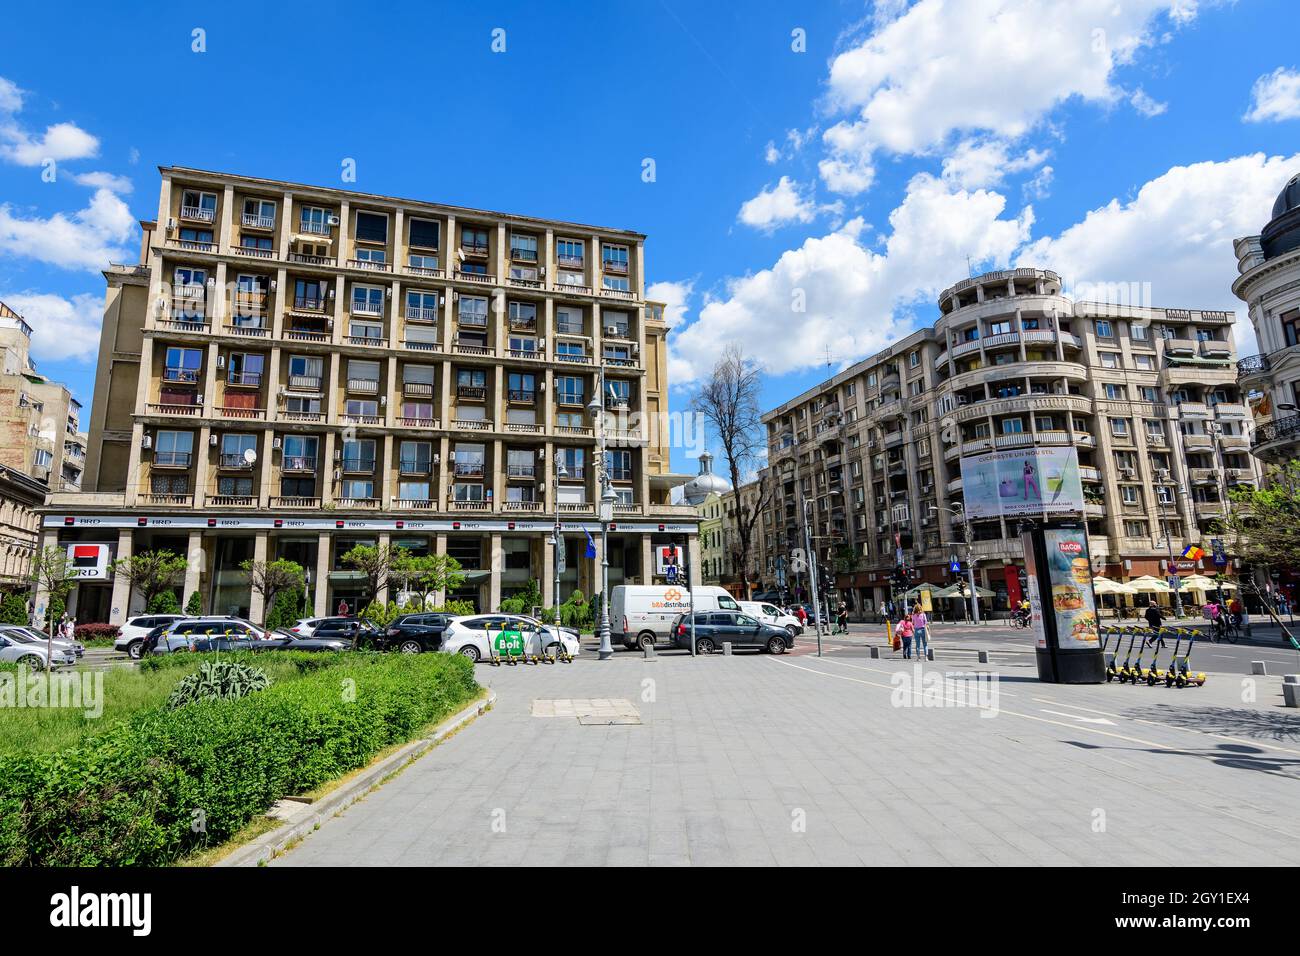 Bucharest, Romania - 6 May 2021: BRD Societe Generale Bank Bank branch entrance in an old building on Calea Victoriei (Victoriei Avenue) in a sunny sp Stock Photo